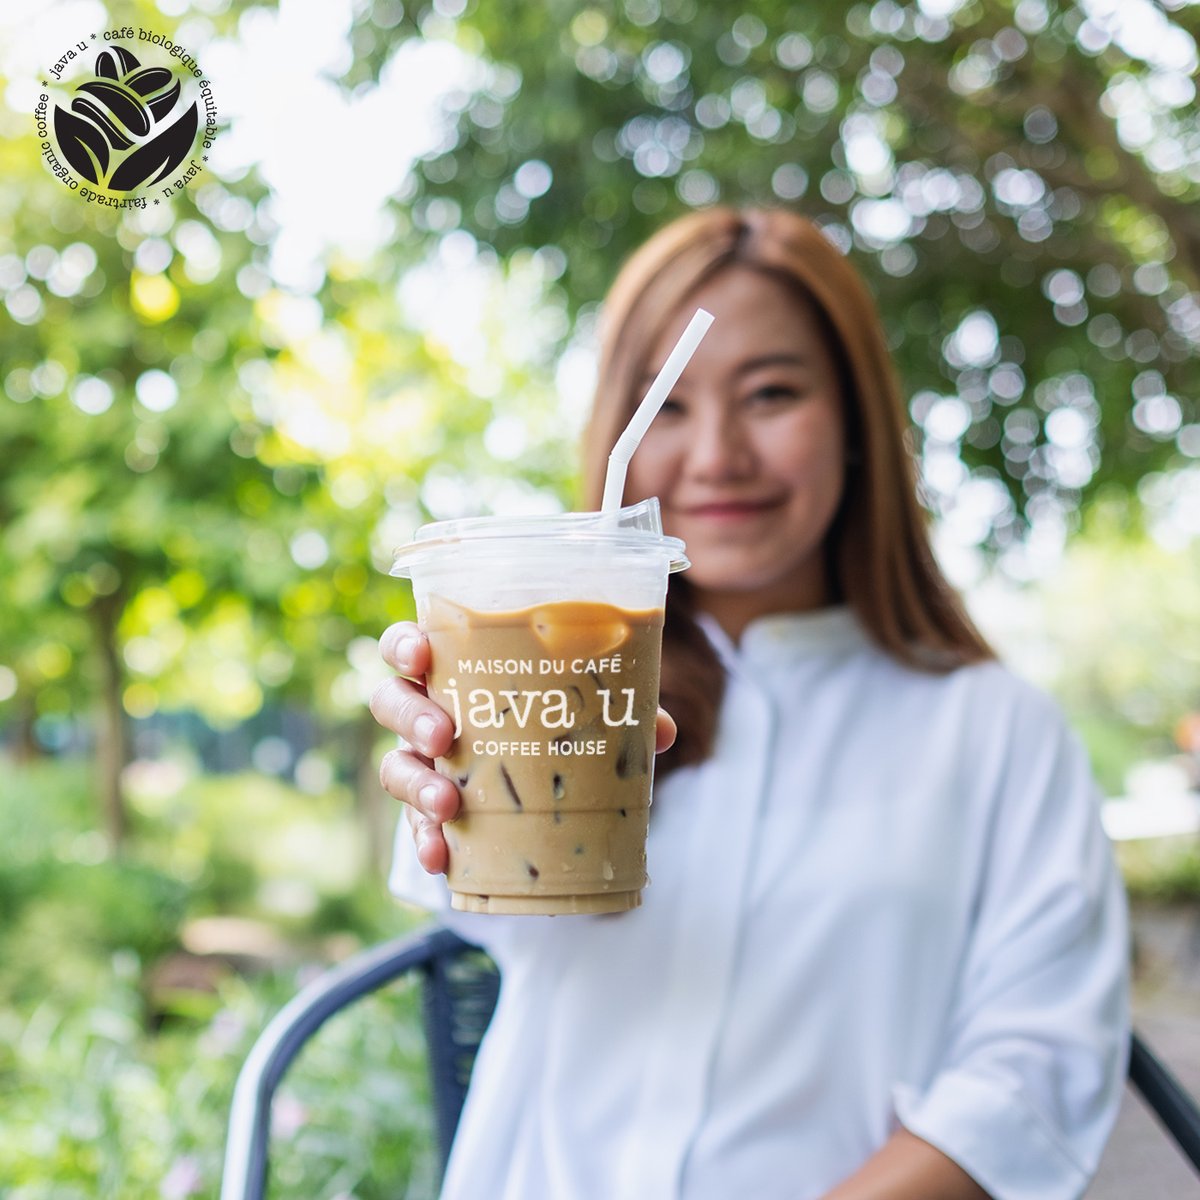 It feels like summer; time for an iced coffee 🌼💛

L'été s'installe, c'est l'heure du café glacé 🌼💛

#javau #fairtradeorganic #montreal #coffee #cafe #mtlcafe #fresh #coffeelover #coffeeshop #feelslikesummer #icedcoffee #riseandshine